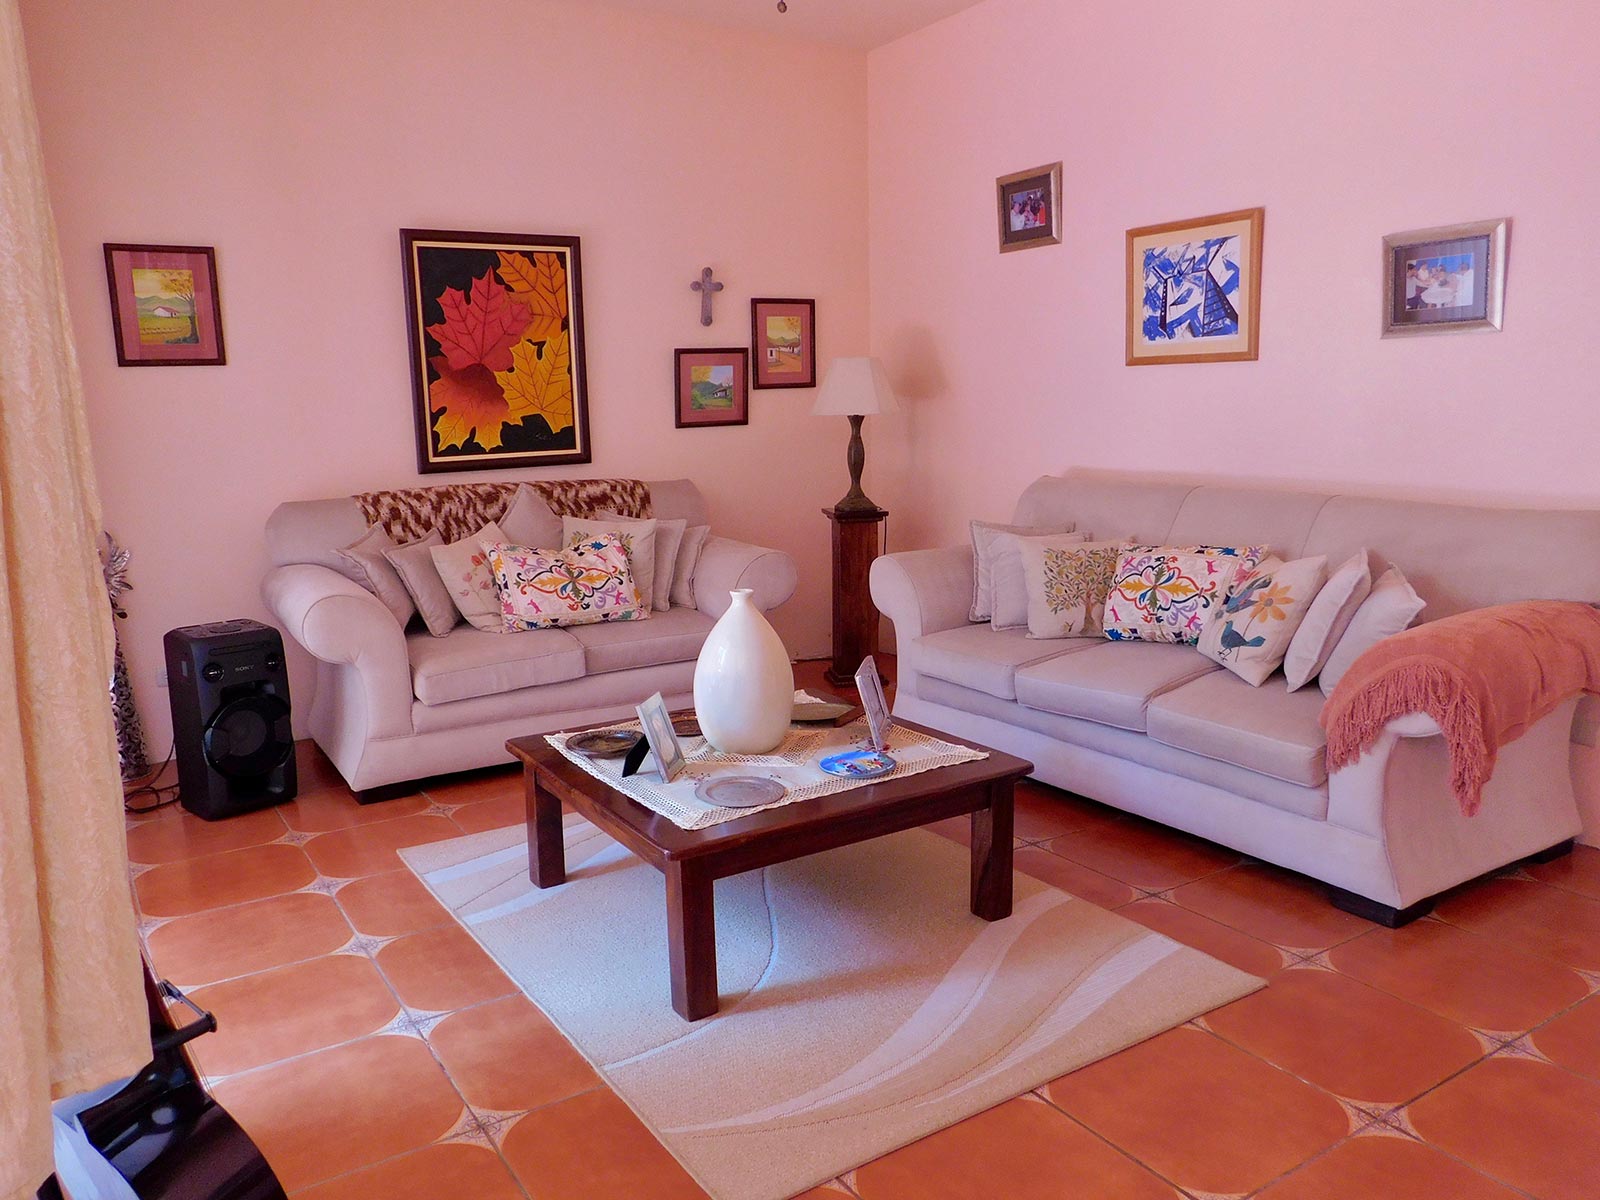 3 br home for sale in atenas 